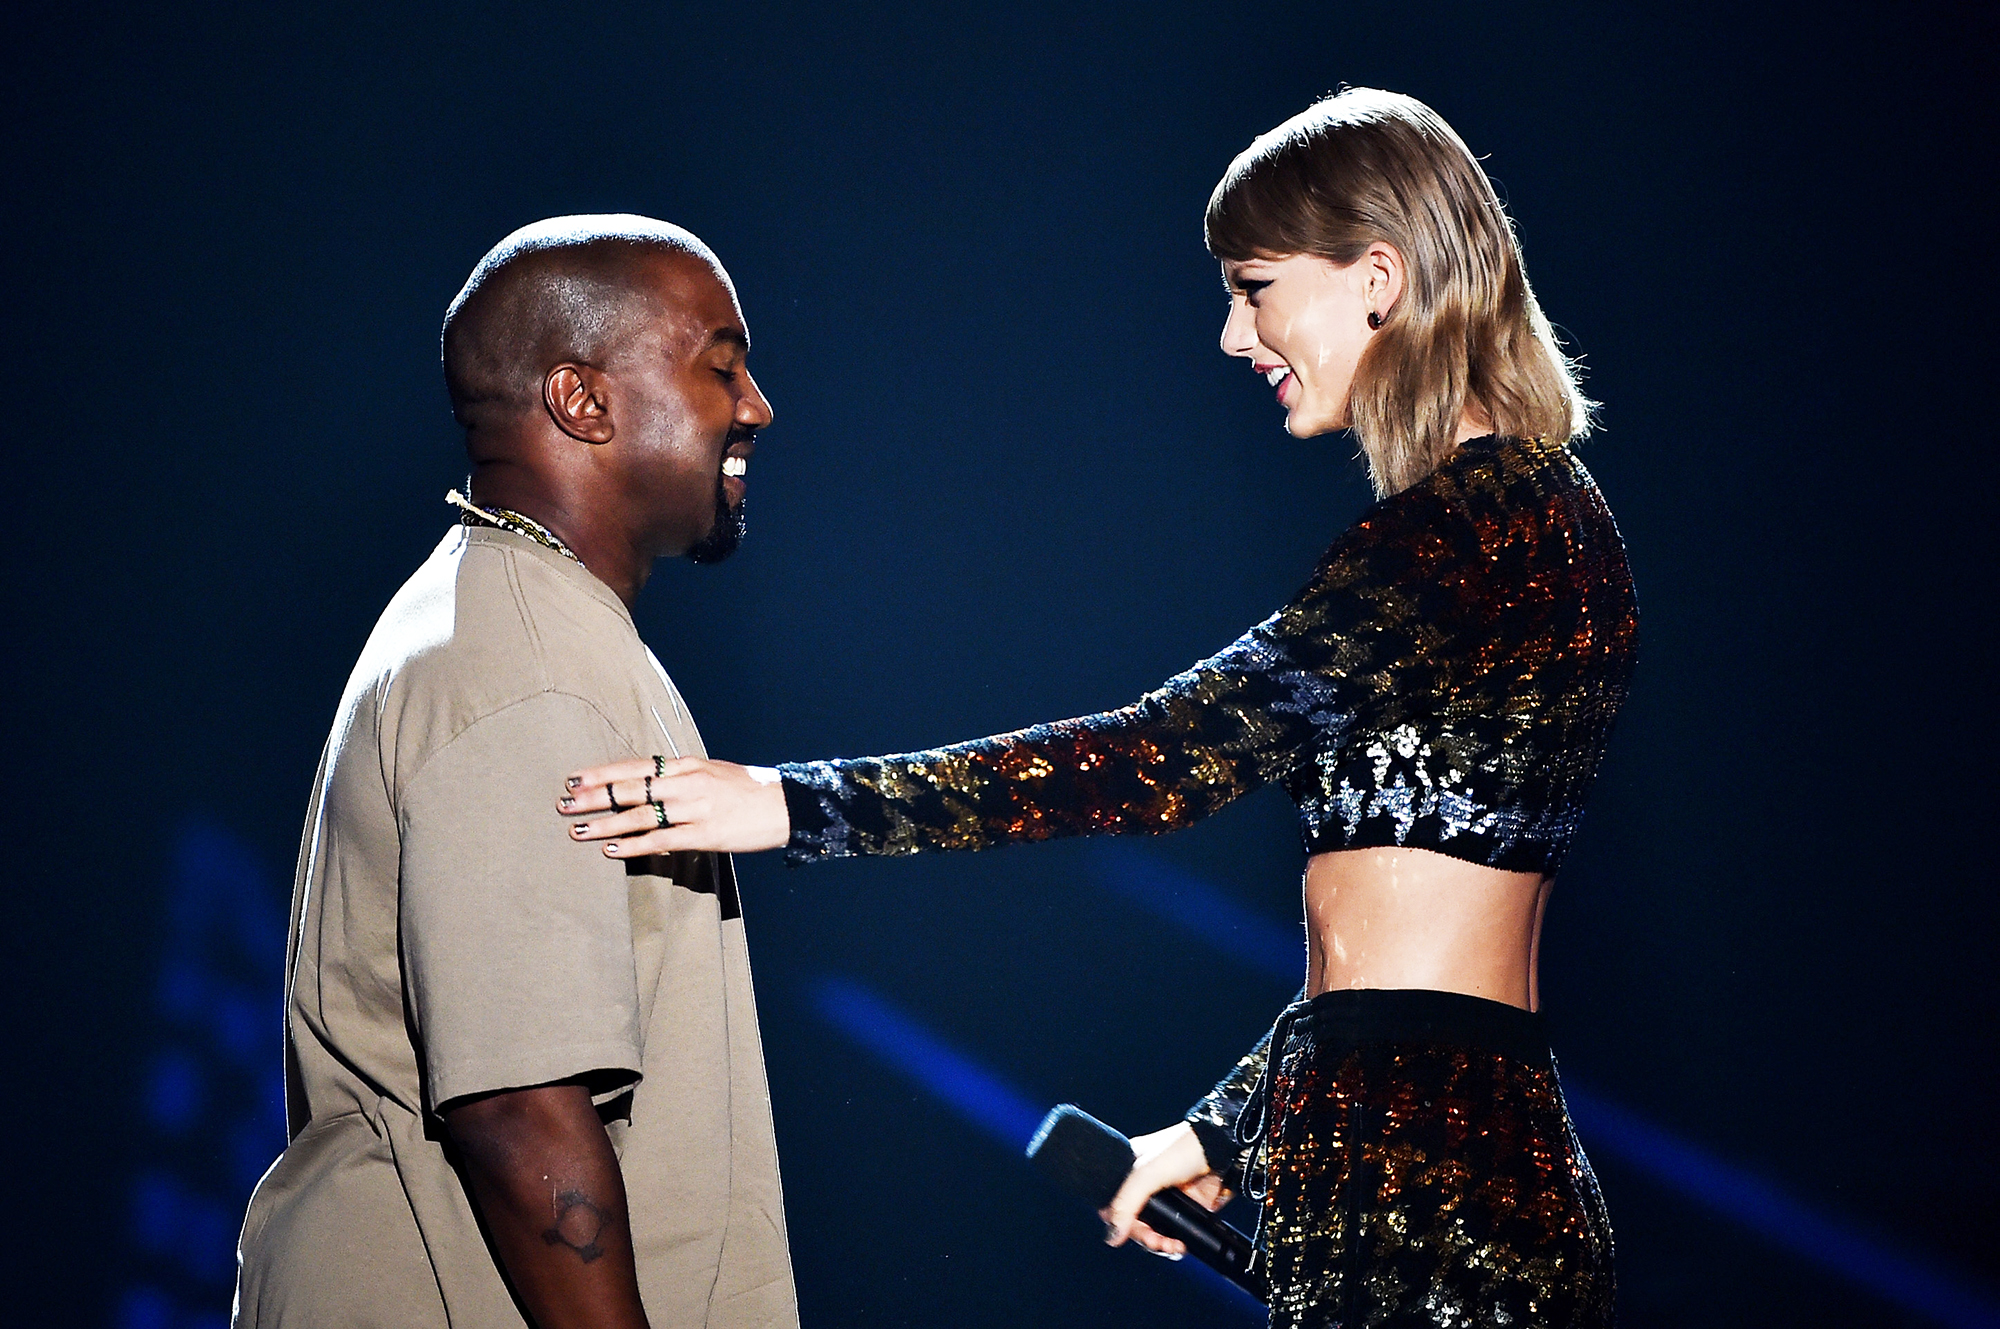 Kanye West, left, accepts the Video Vanguard Award from Taylor Swift onstage during the 2015 MTV VMAs in Los Angeles, on Aug. 30, 2015.